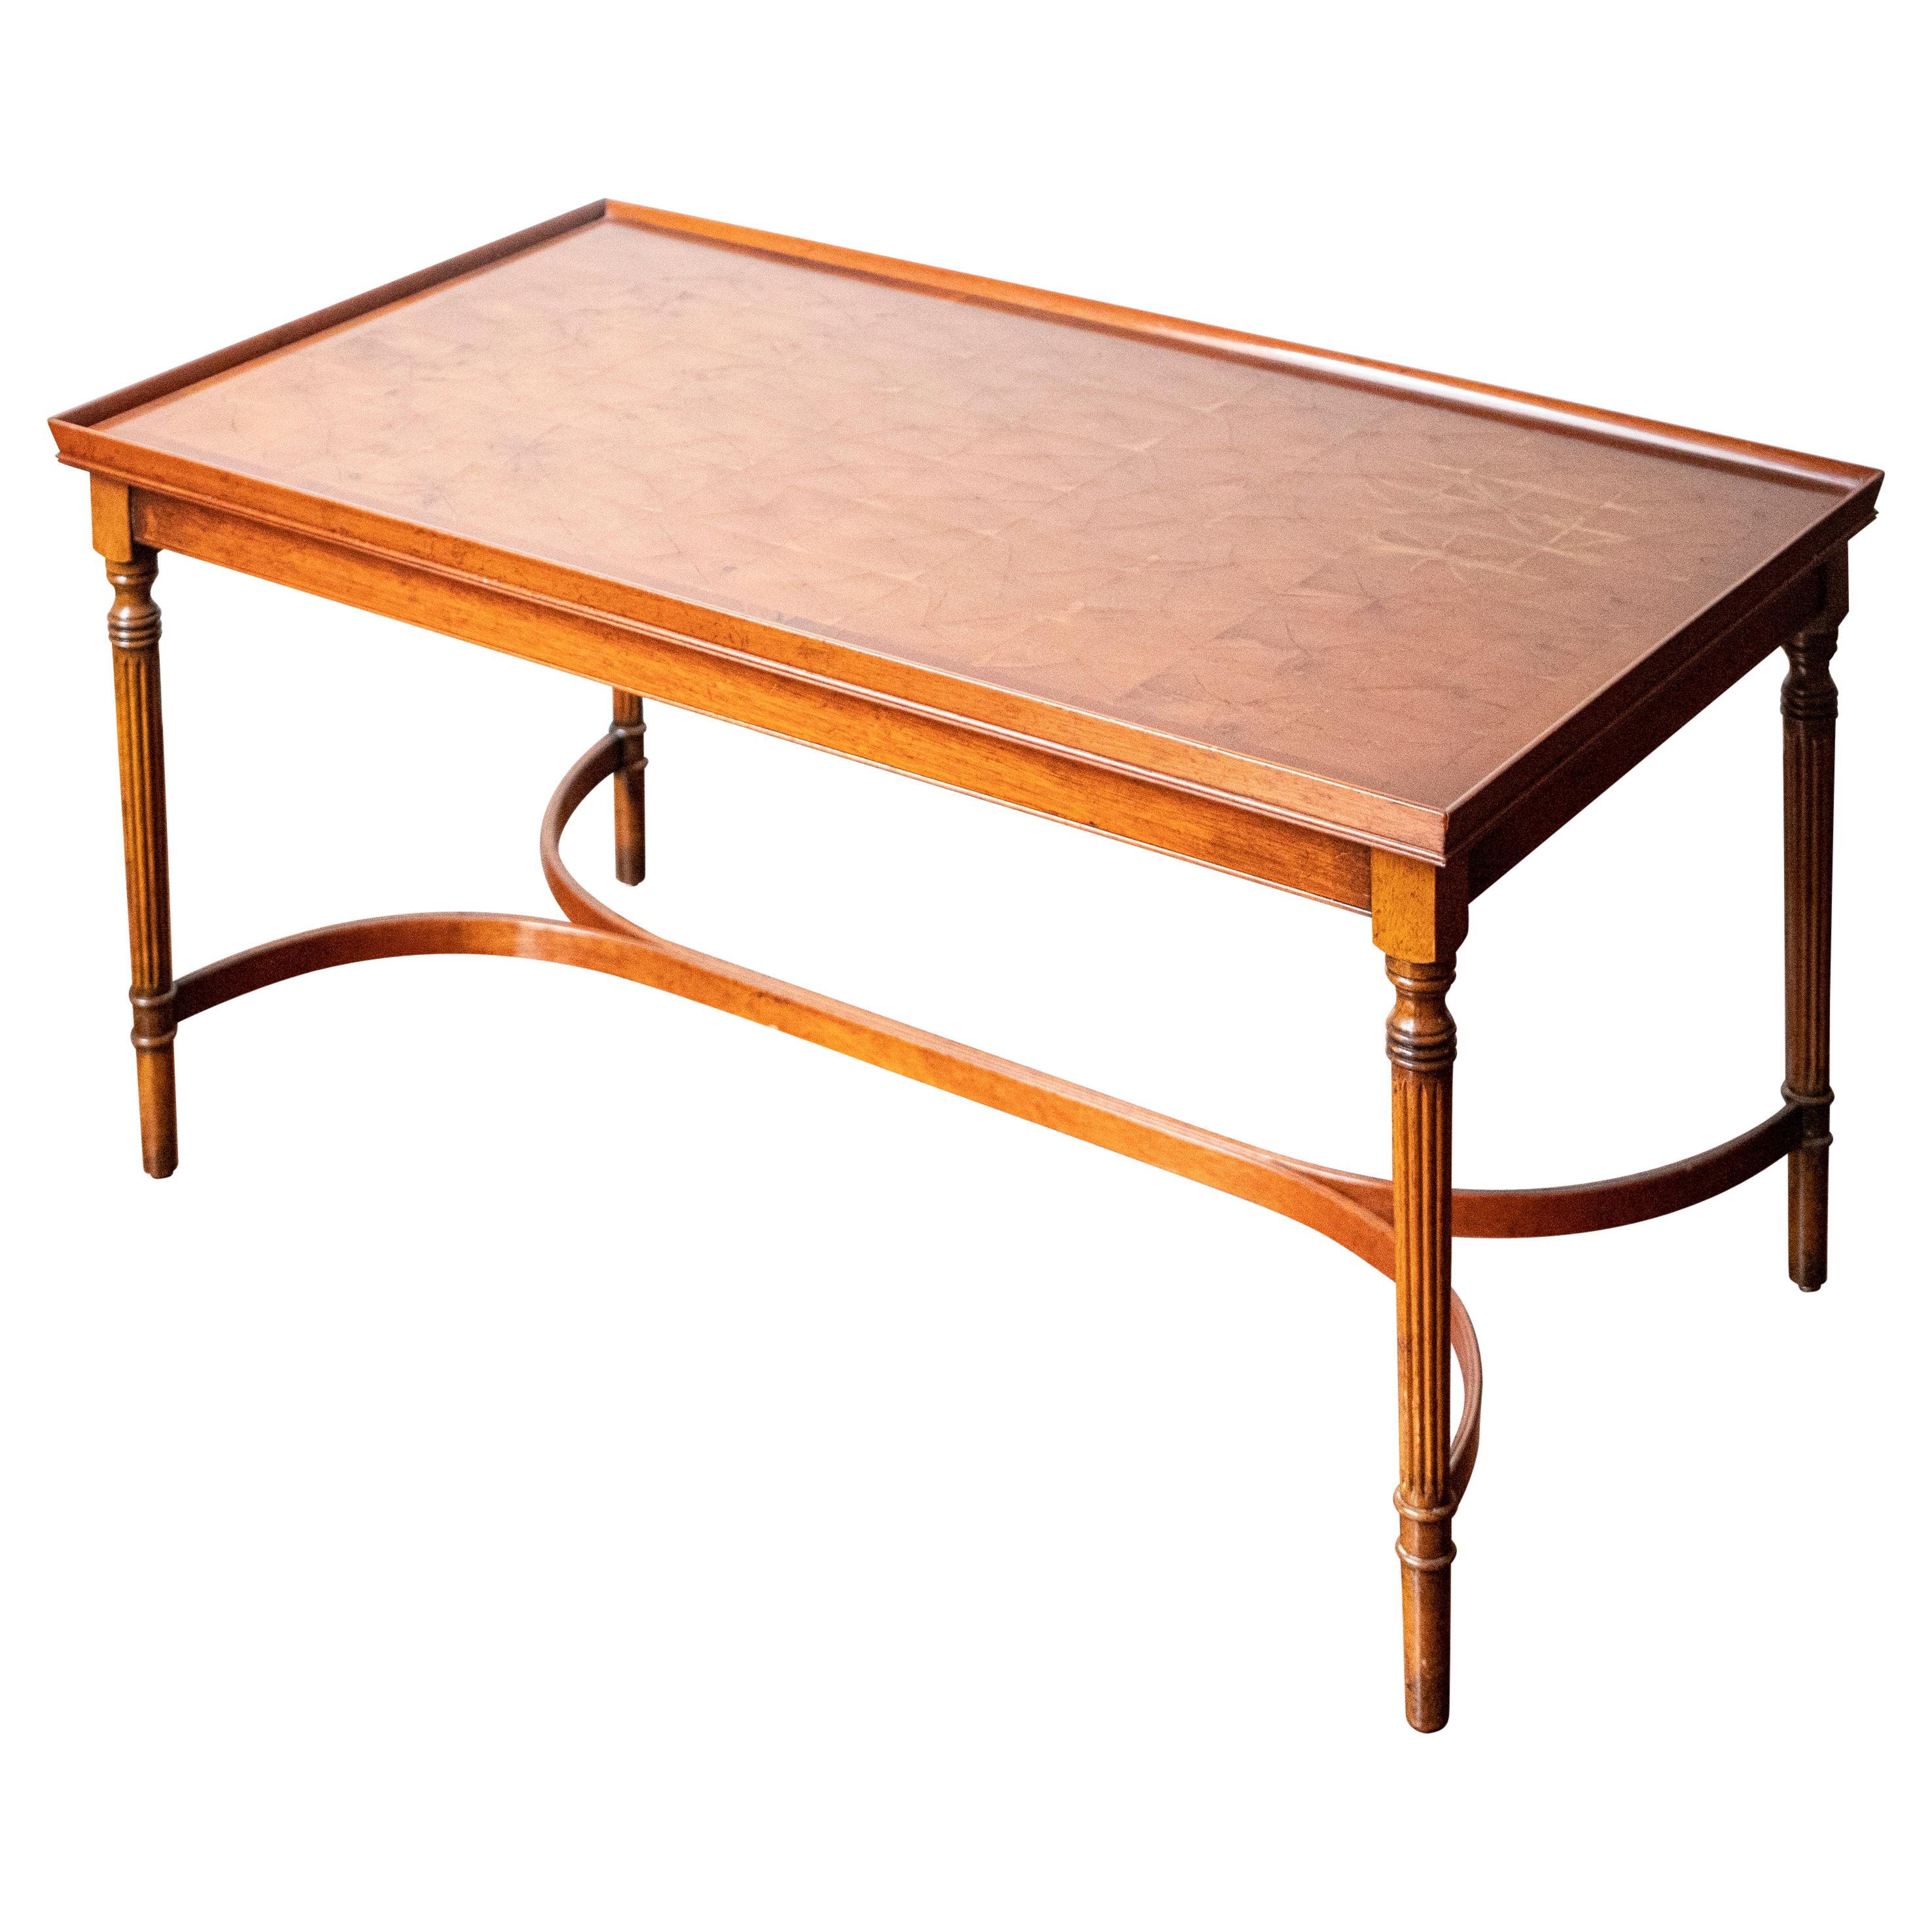 Mahogany Coffee Table with Fluted Legs